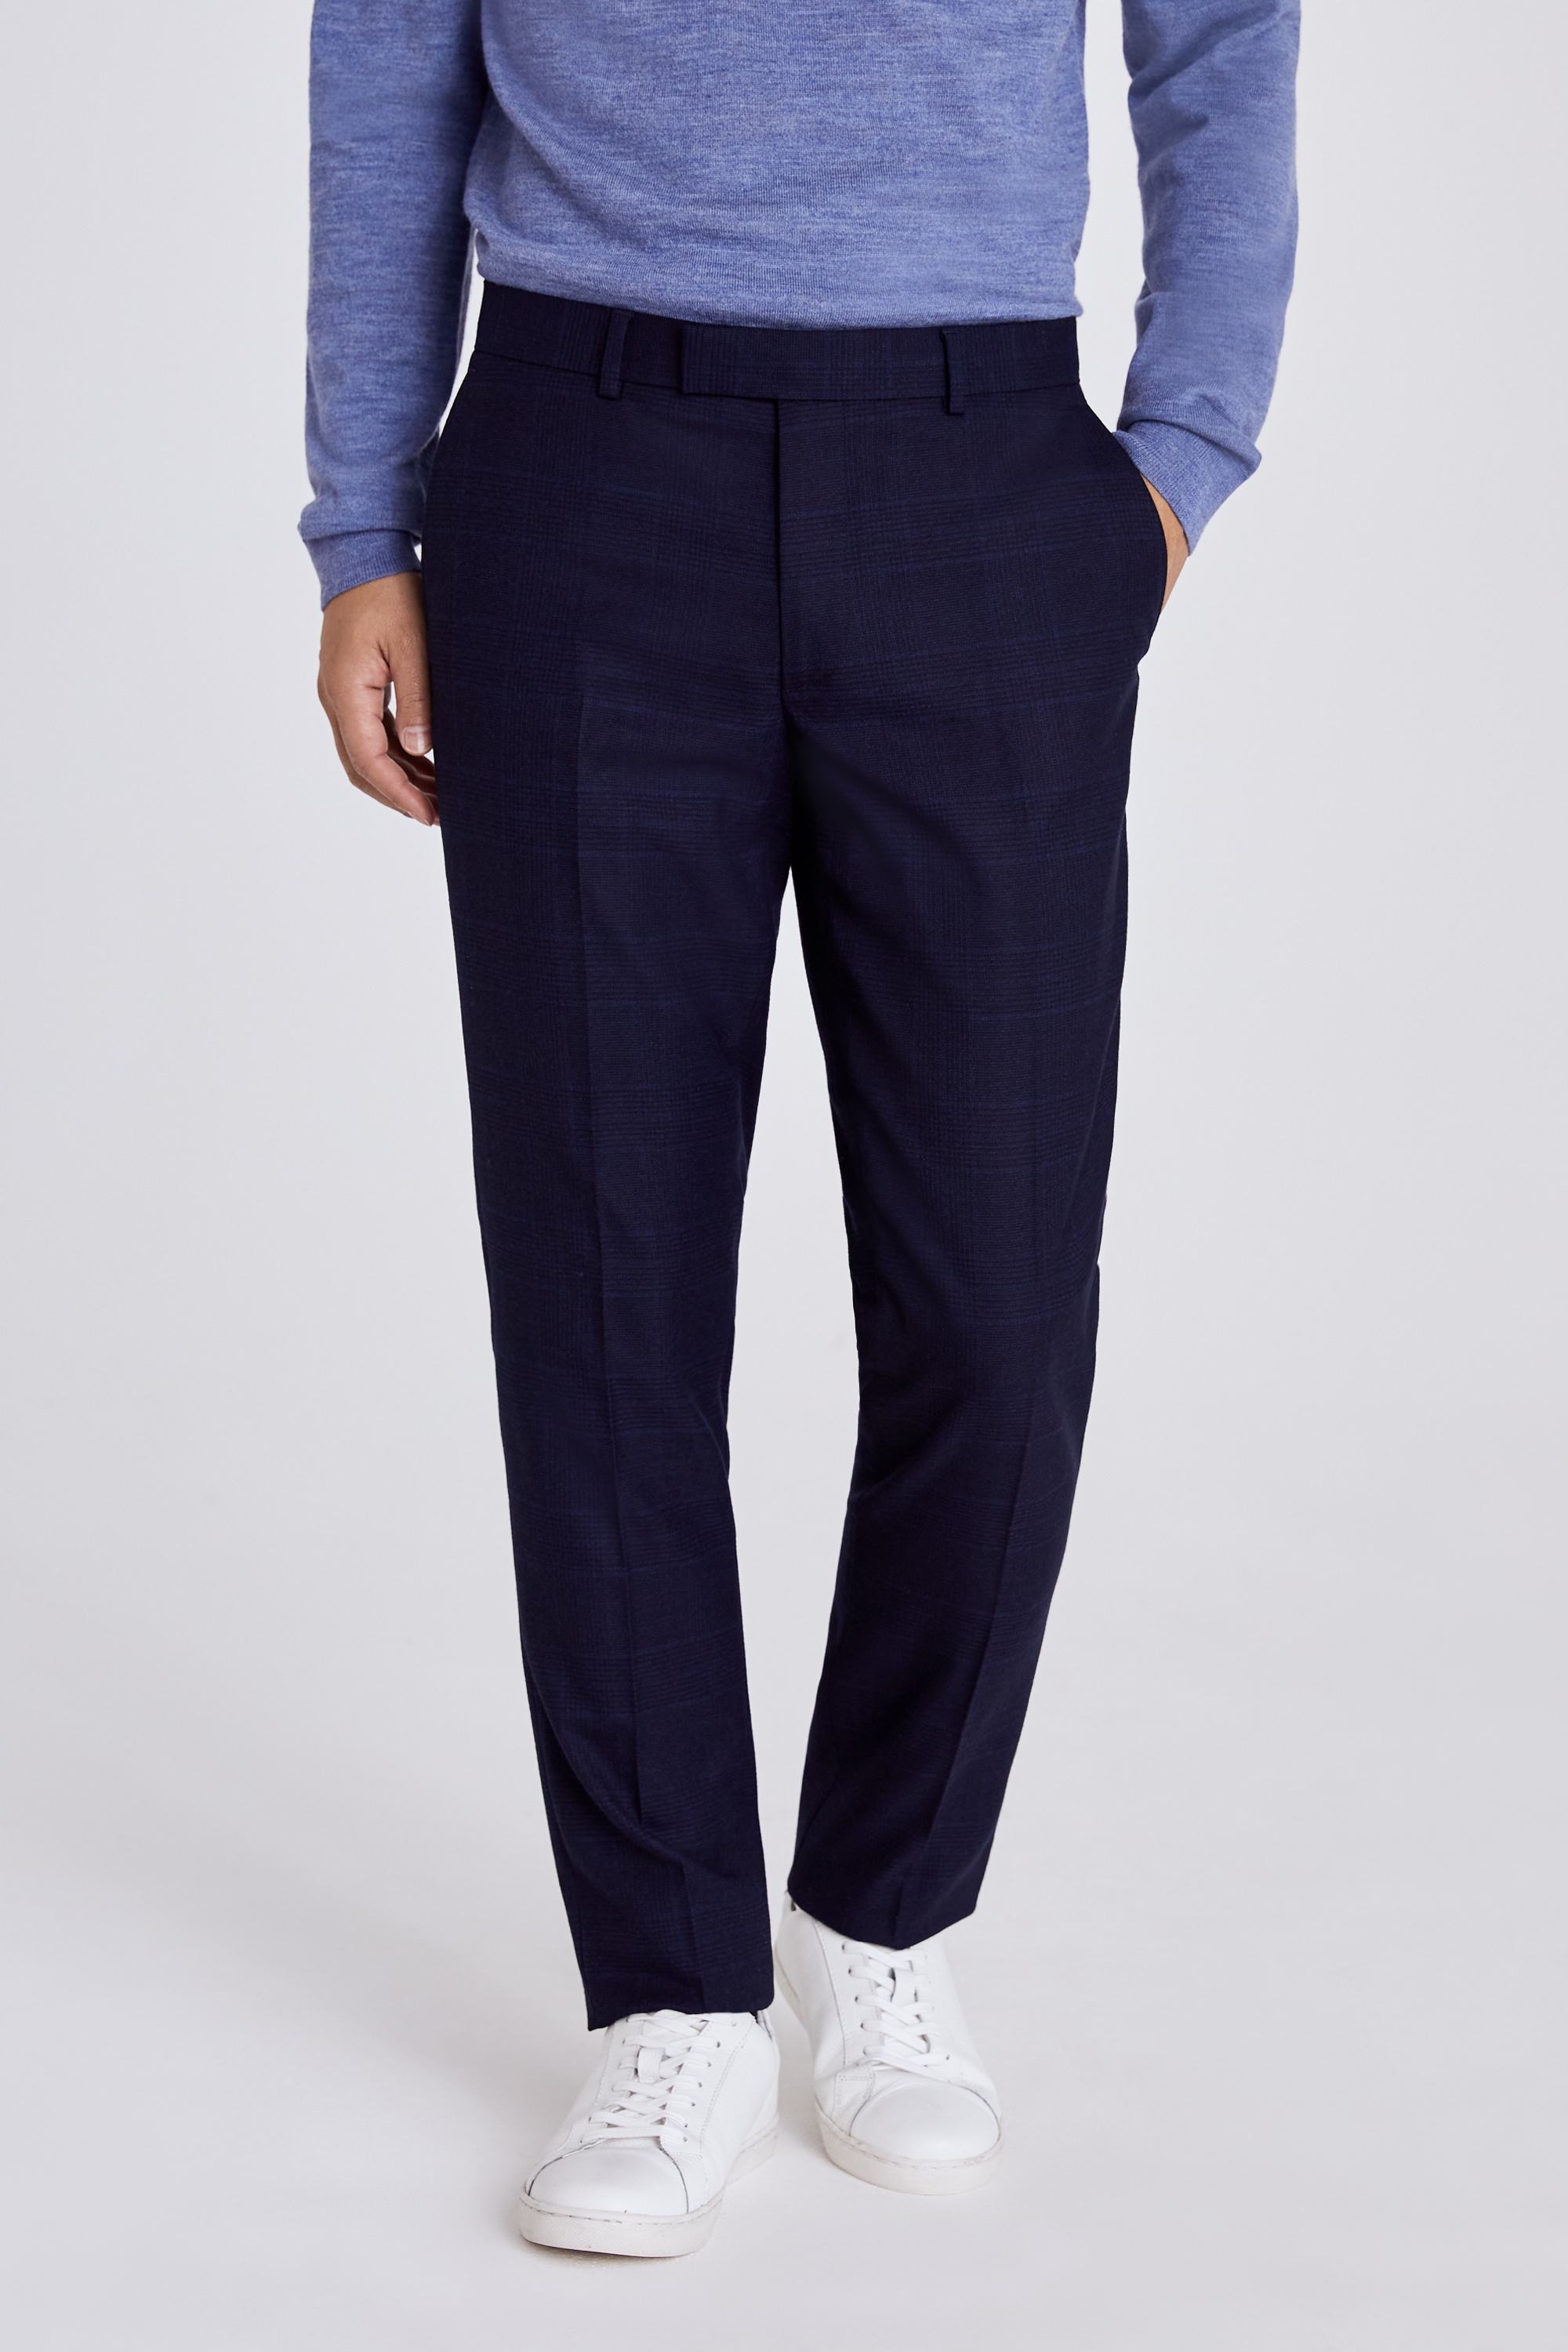 Slim Fit Ink Check Trousers | Buy Online at Moss